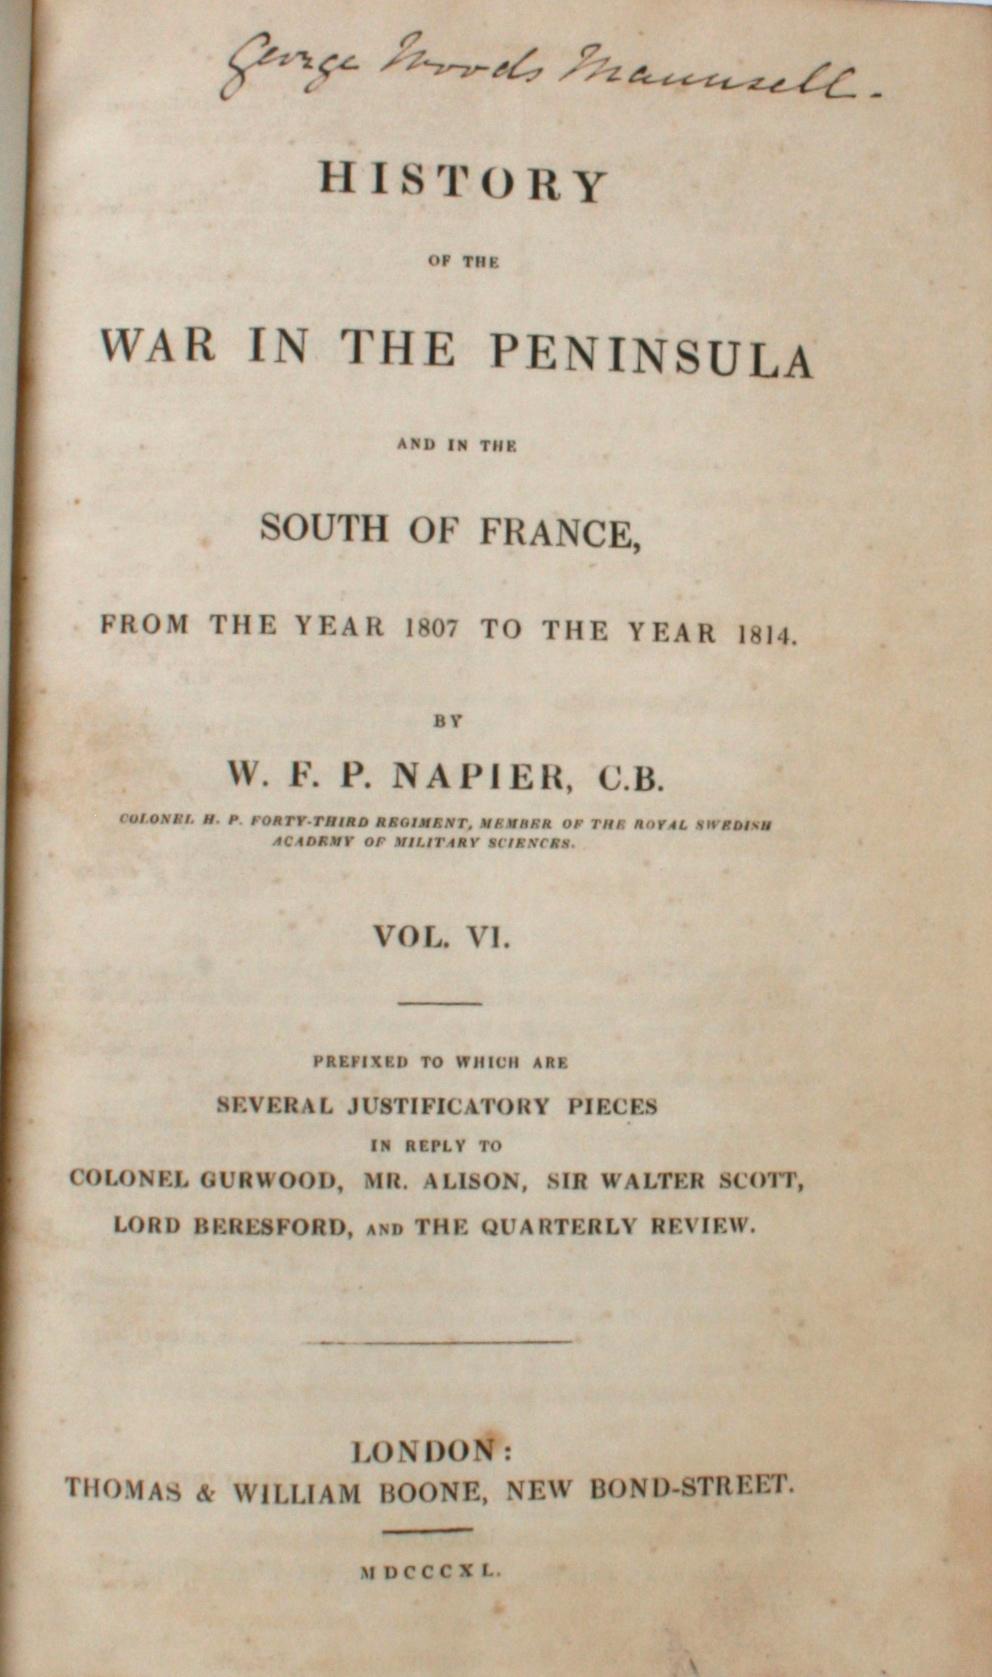 History of the War in the Peninsula by W.F.P. Napier with Lord Elgin Provenance For Sale 3